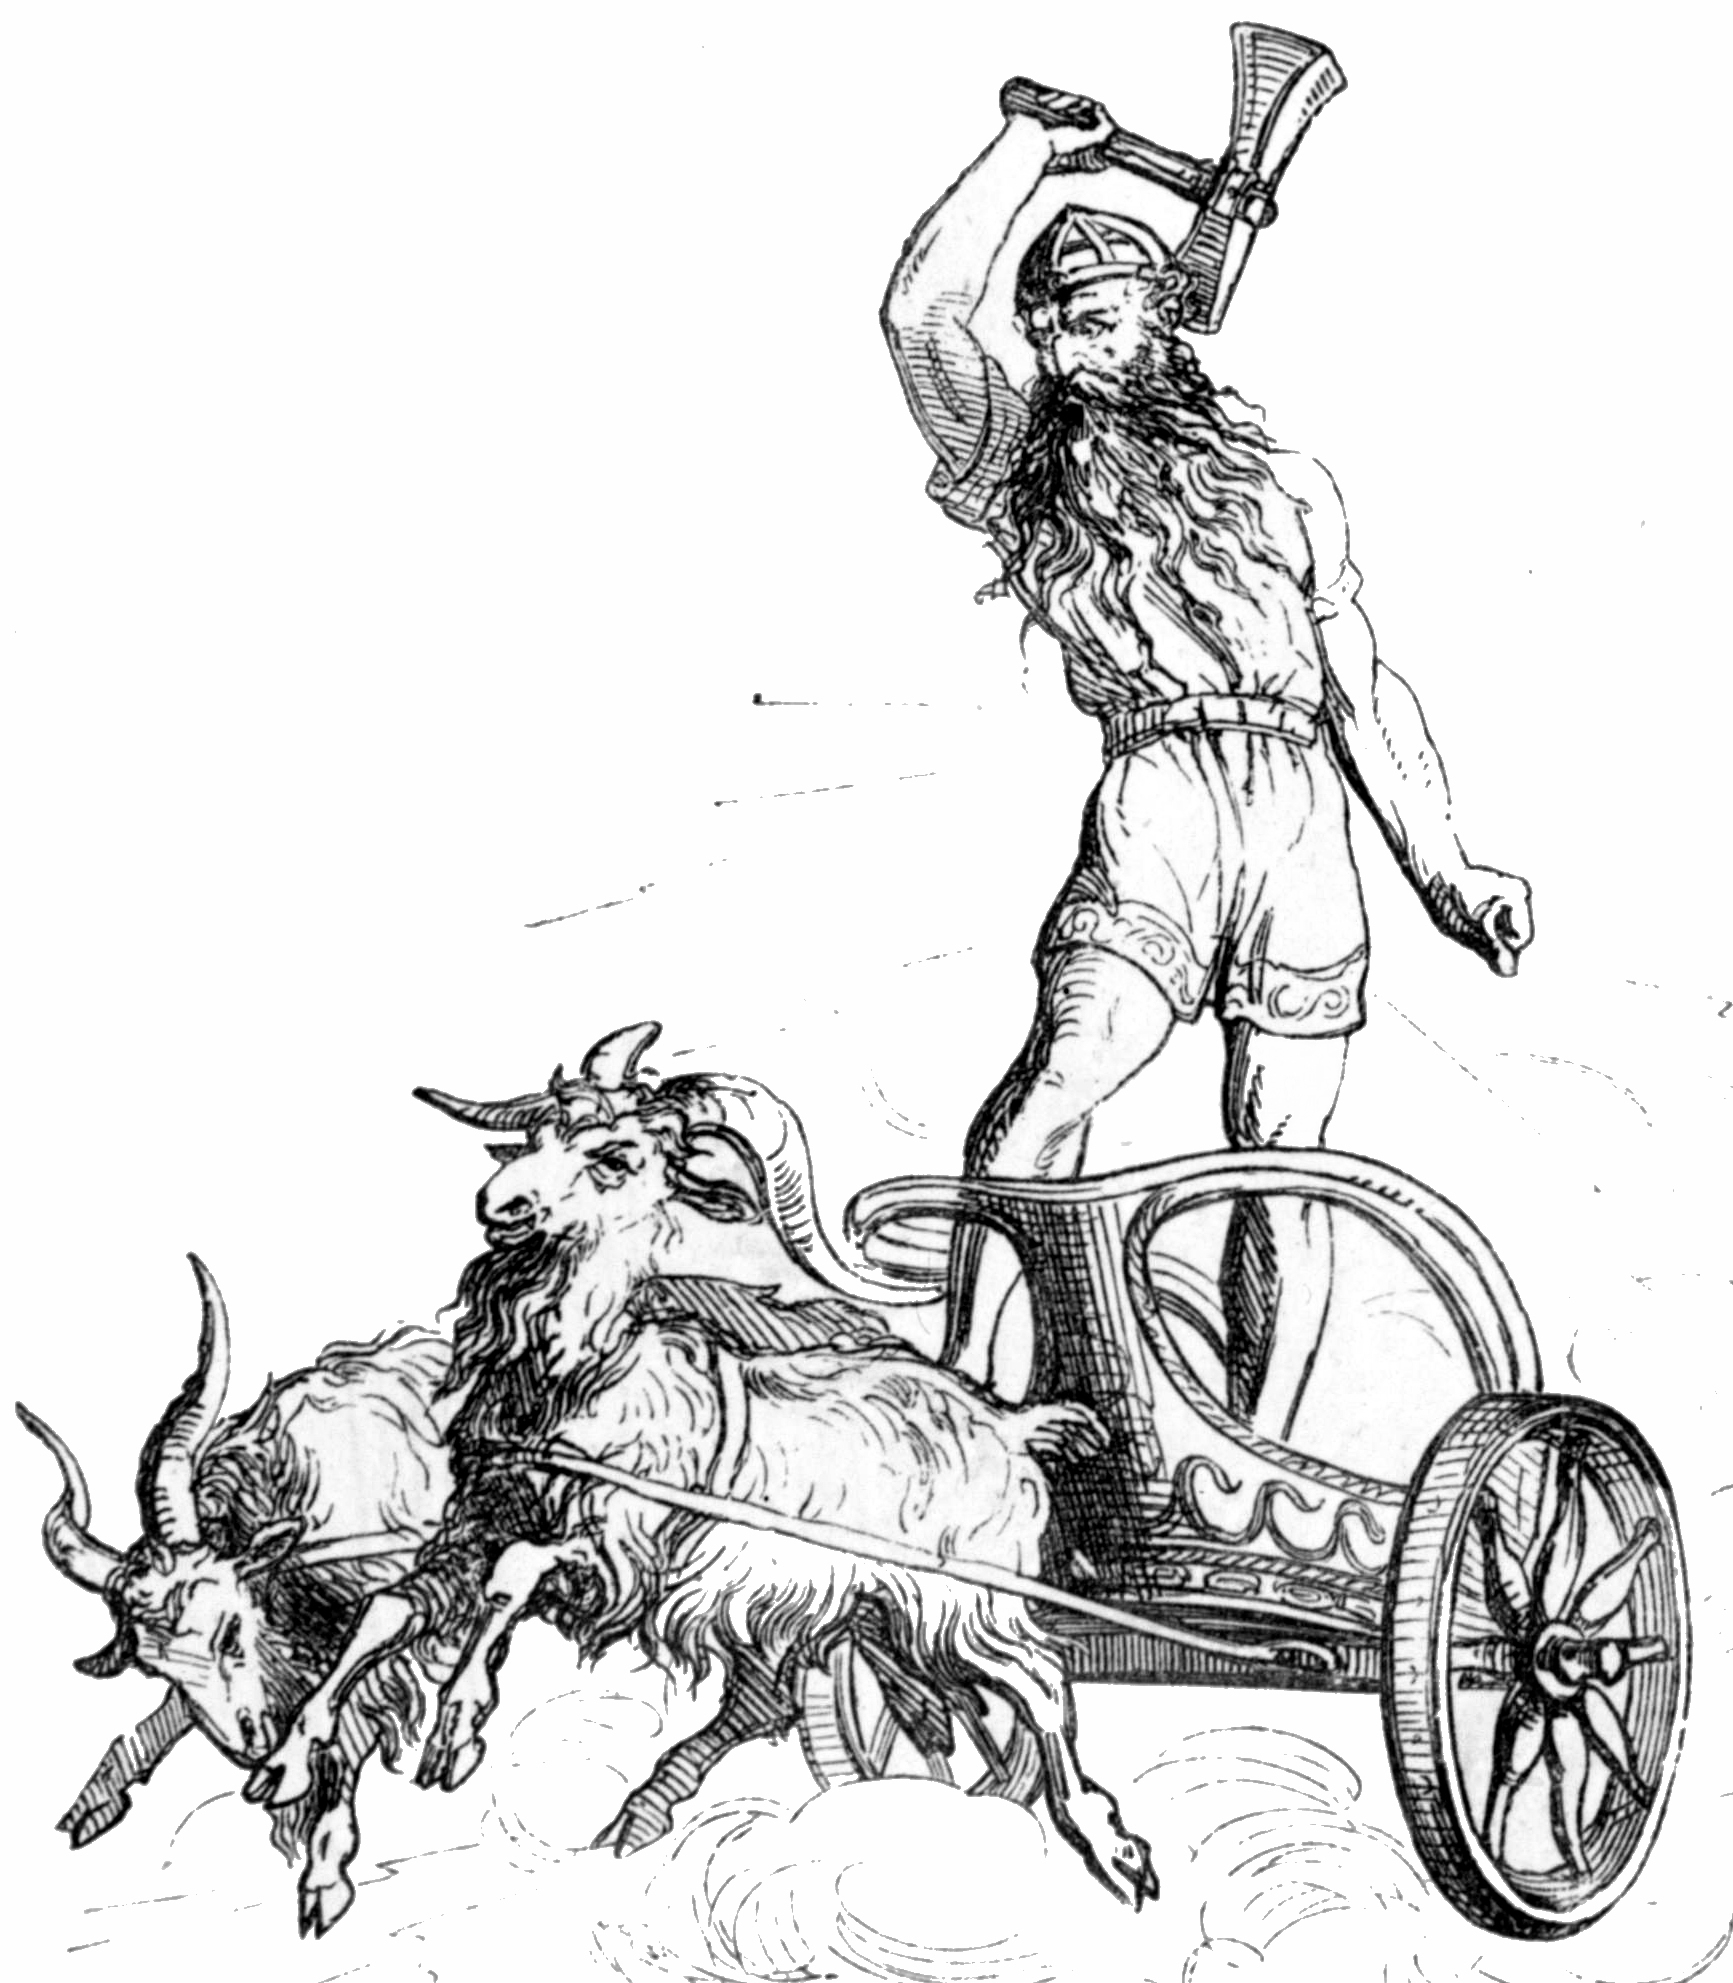 1865-thor_in_his_chariot-ludwig_pietsch-1824-191111.jpg